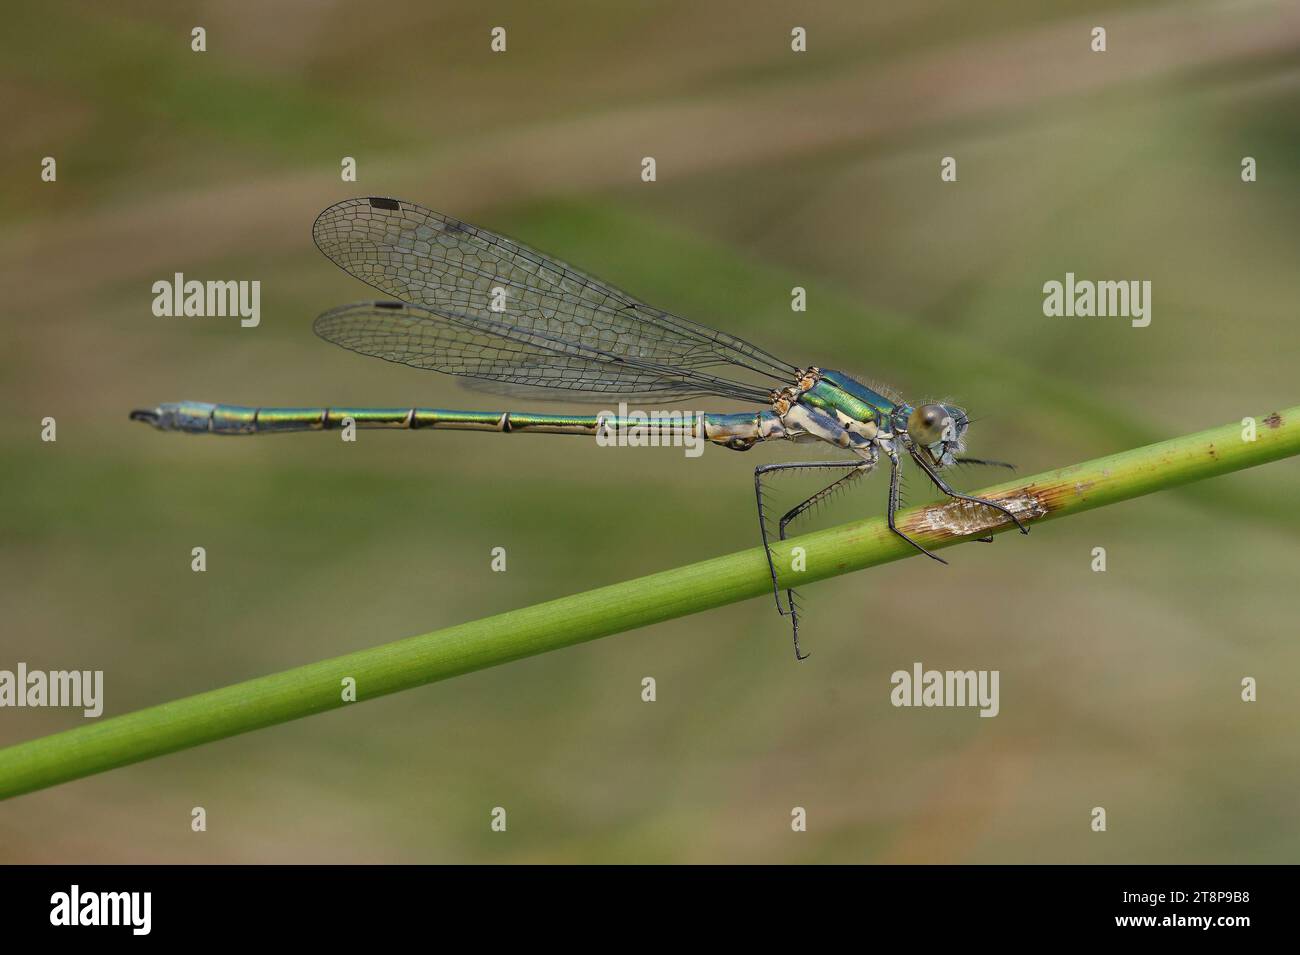 Natural closeup of a Emerald Spreadwing damselfly, Lestes dryas, perched against green blurred background Stock Photo